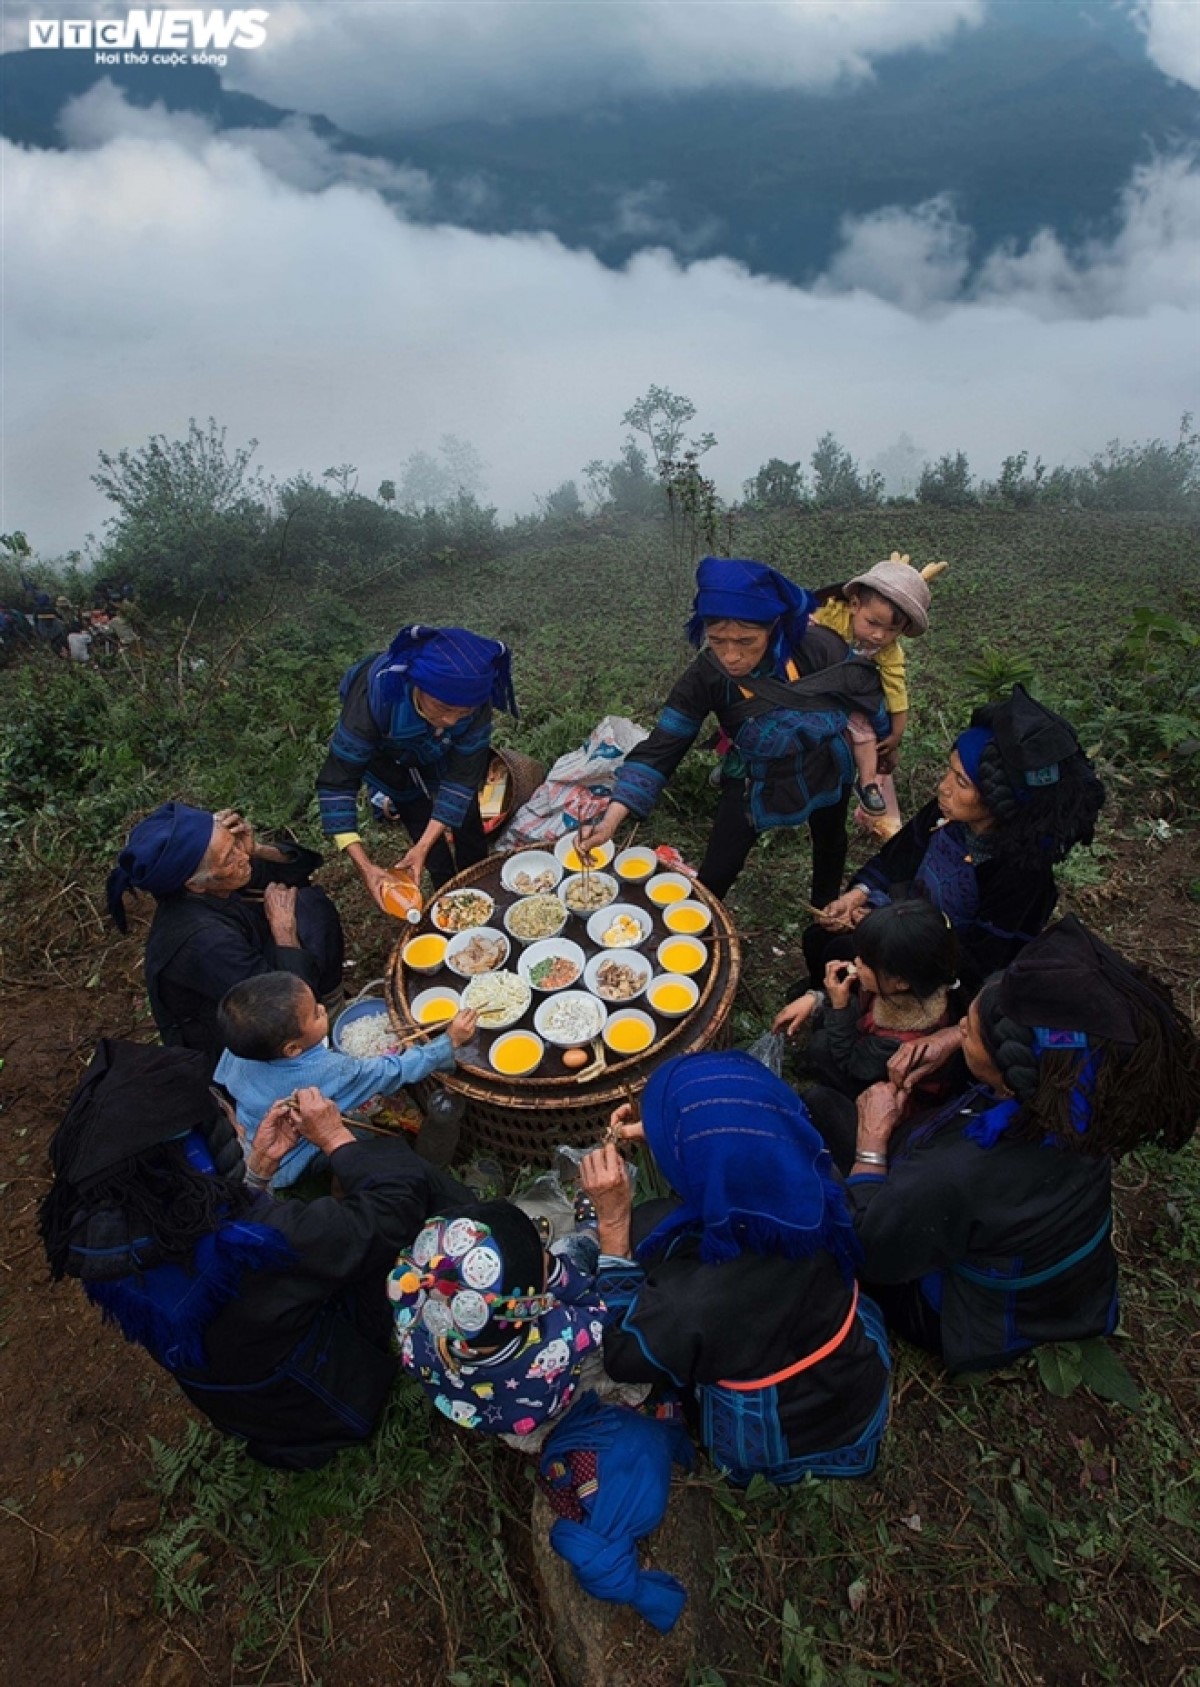 before they leave for home, family members enjoy a lunch in front of the grave, an act which shows the solidarity of the ha nhi ethnic people through various generations.